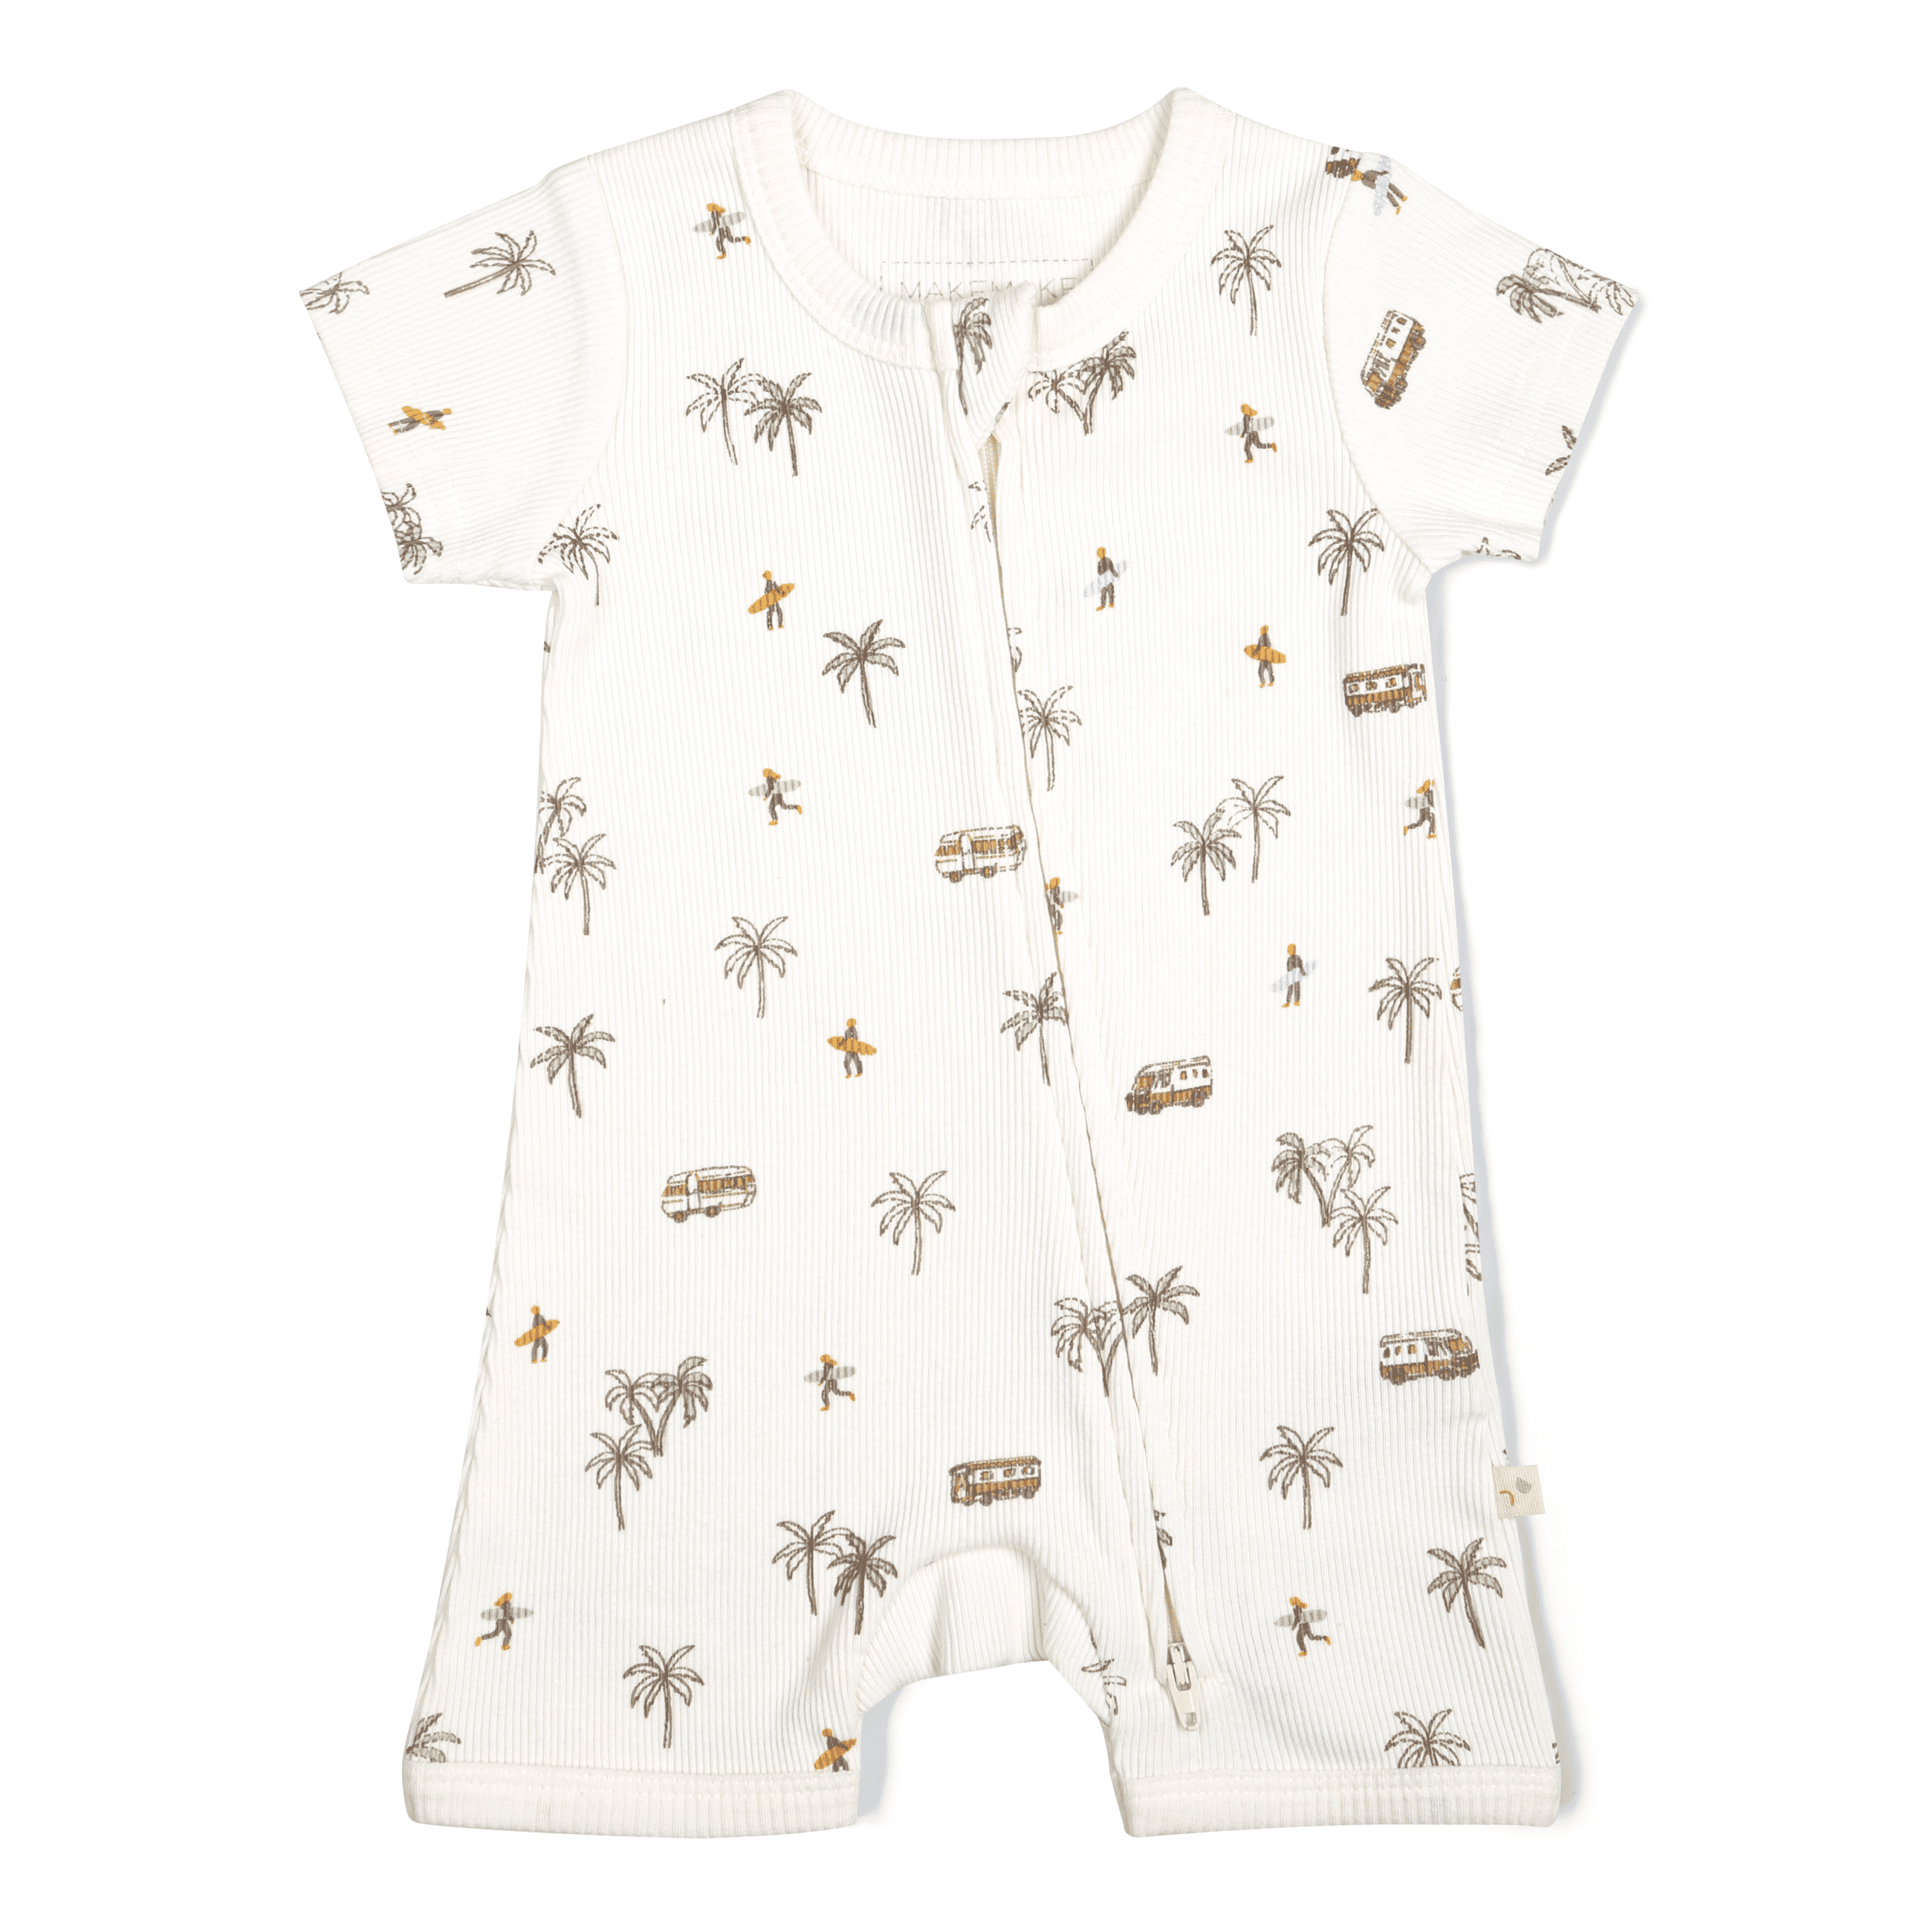 A white Organic Short Zip Romper - Malibu decorated with a tropical print featuring palm trees, surfboards, and vans, displayed on a plain white background. Ideal for both boy and girl babies by Makemake Organics.